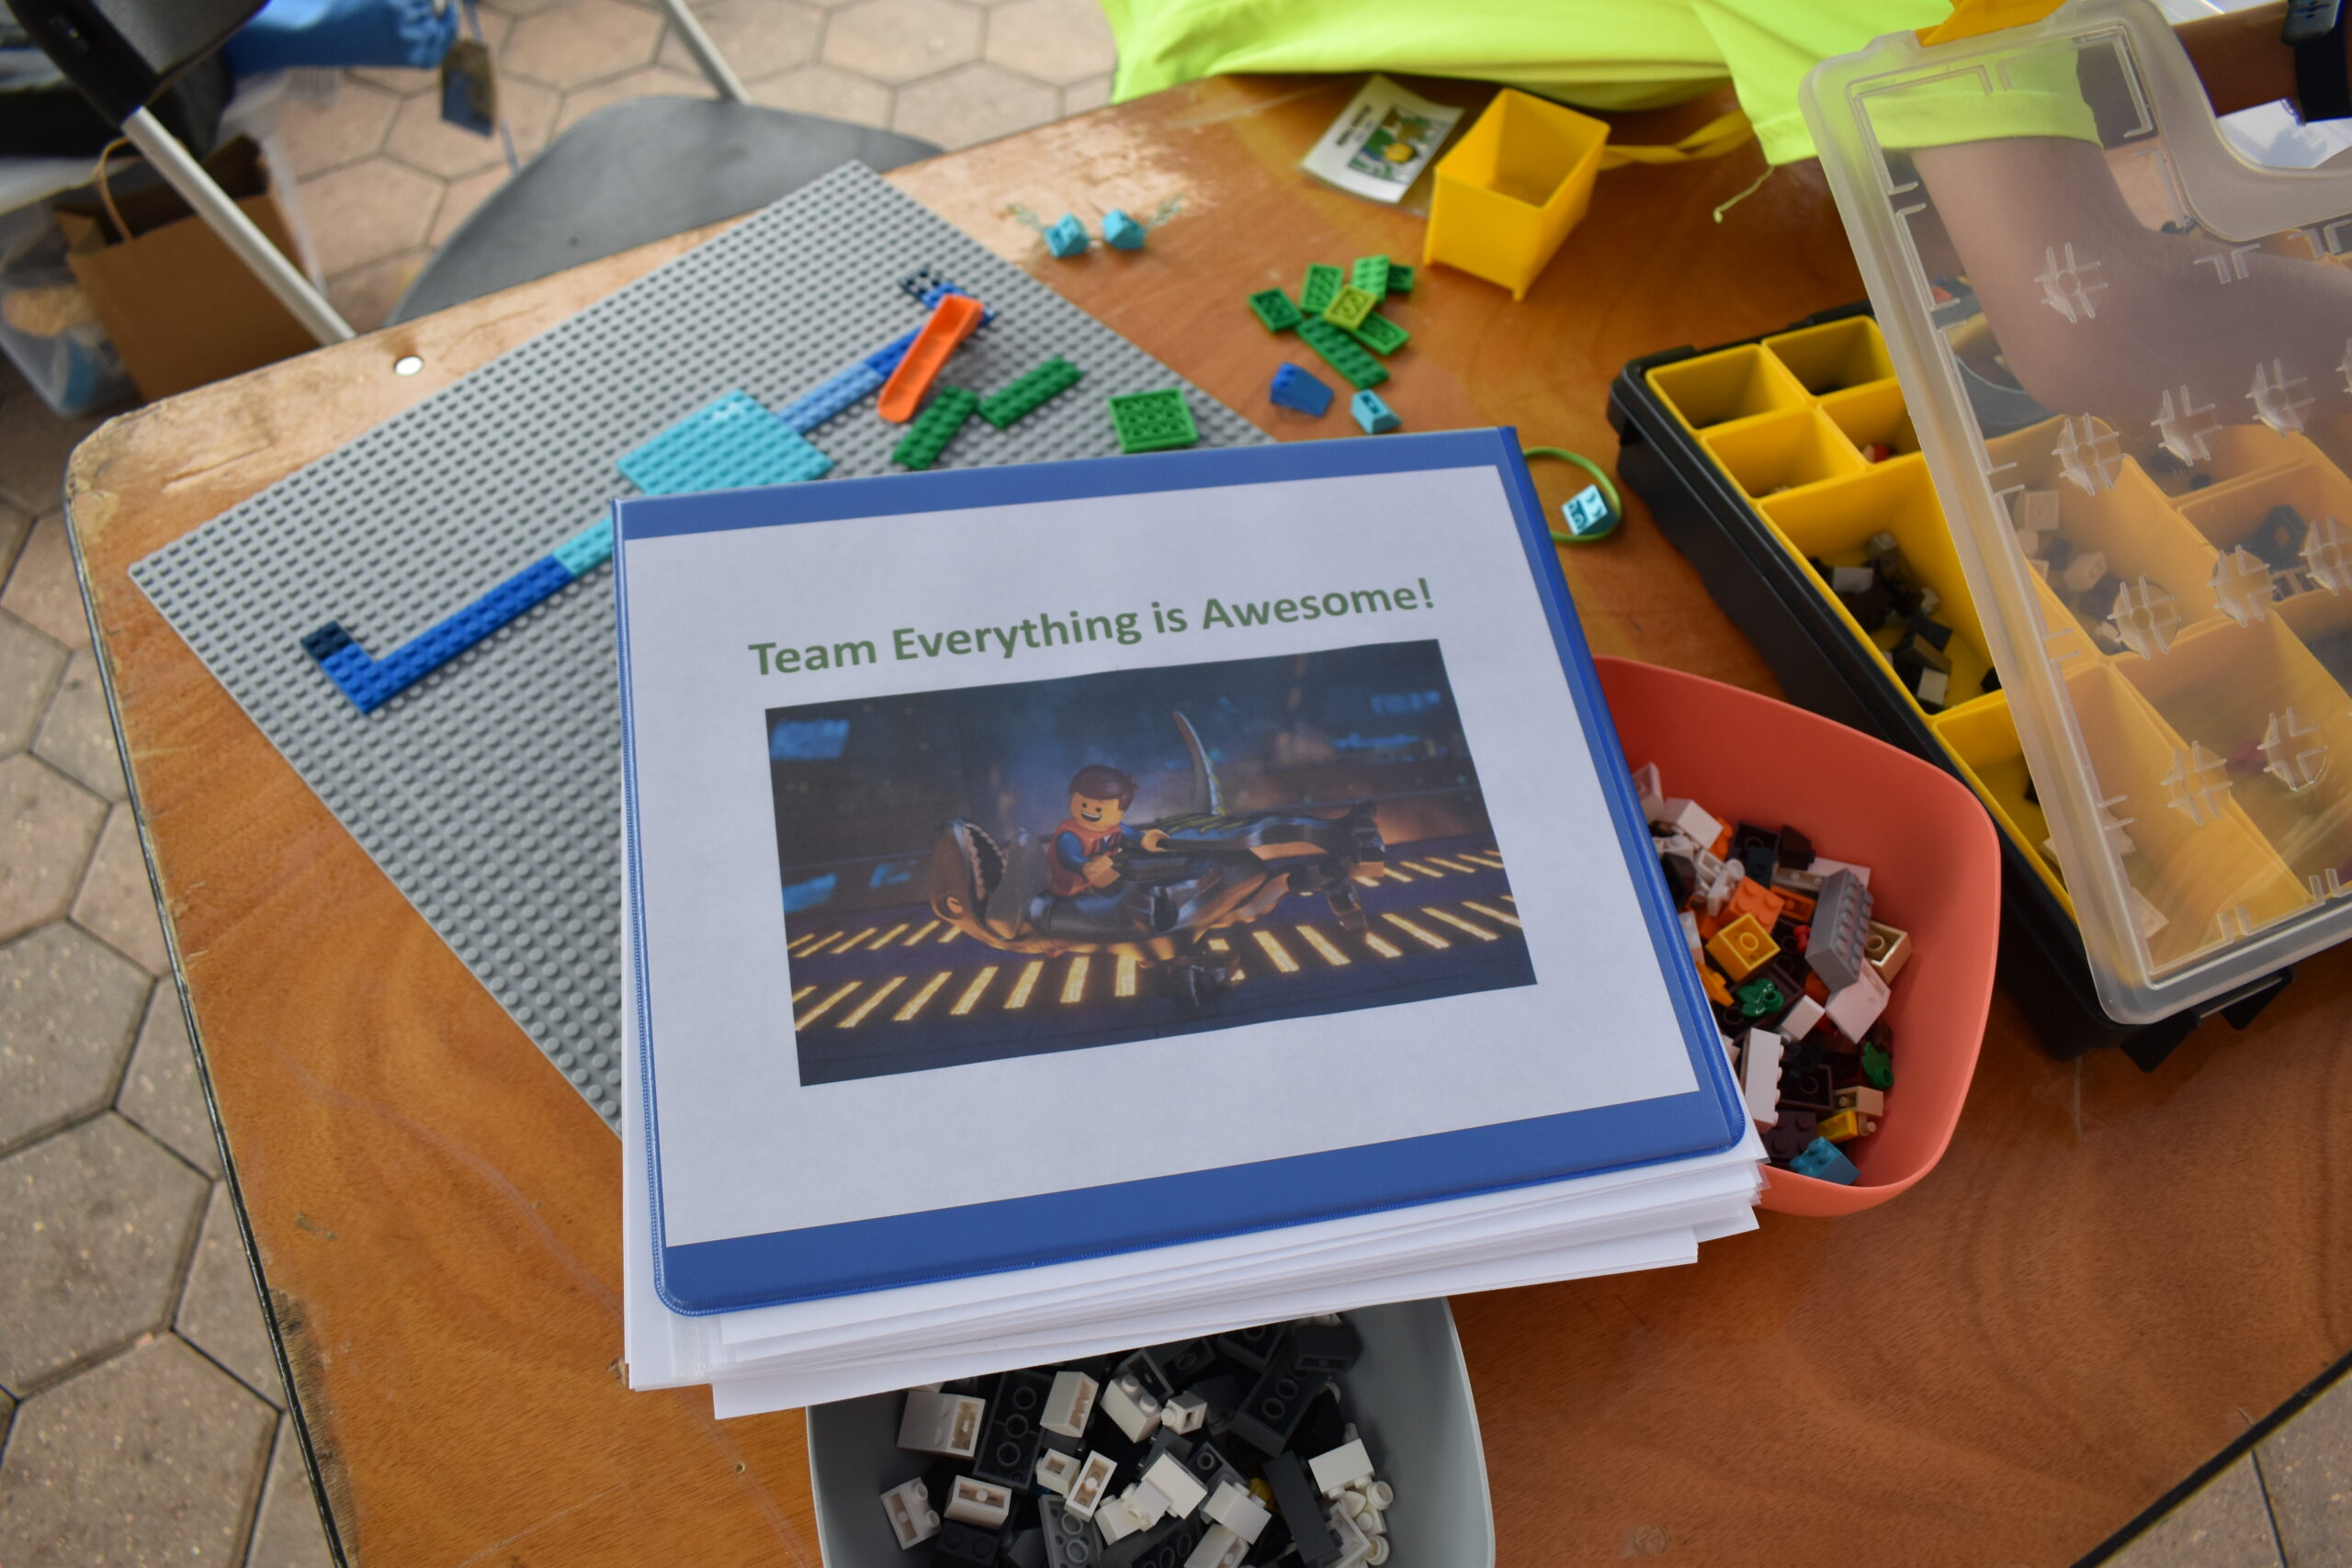 Binder of "Team Everything is Awesome!"